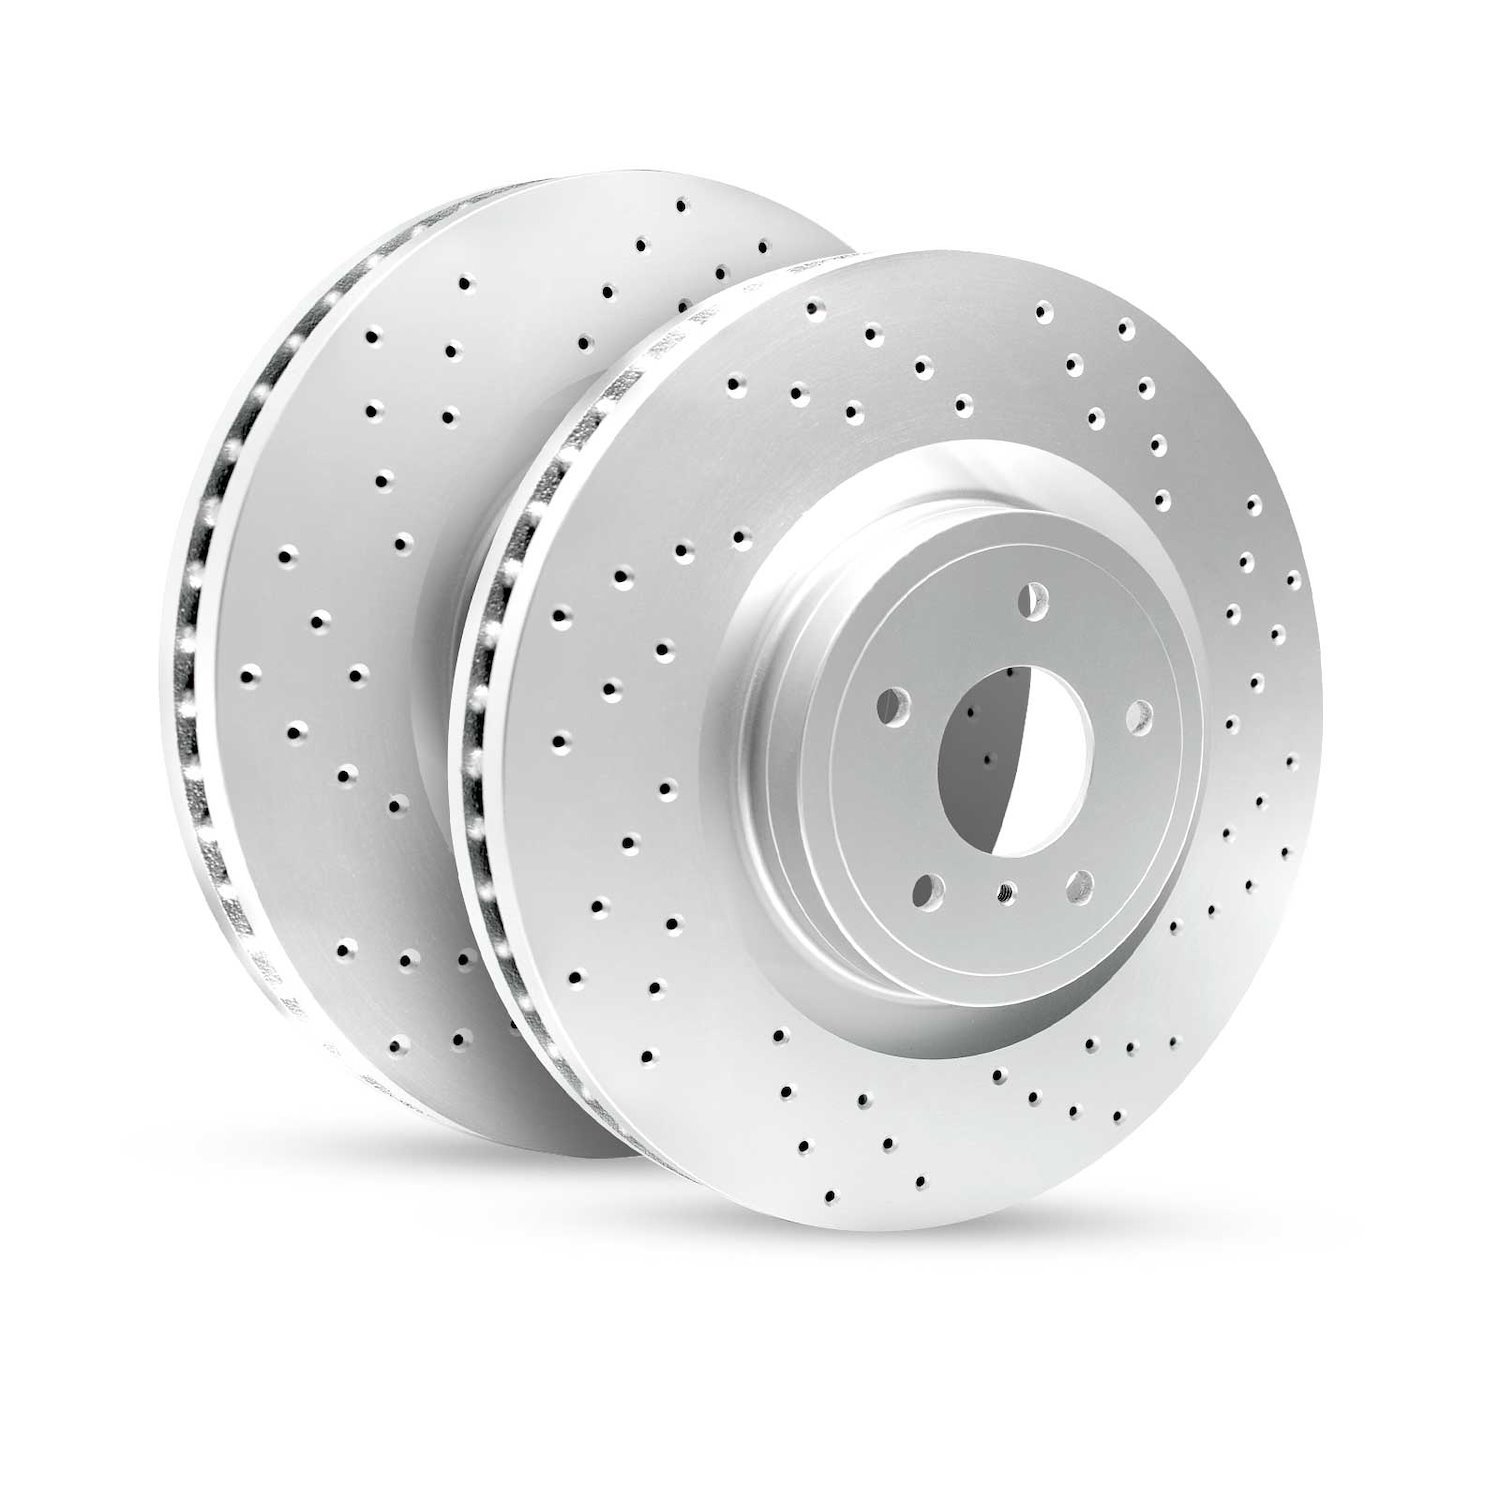 GEO-Carbon Drilled/Slotted Rotors, 2004-2010 BMW, Position: Rear